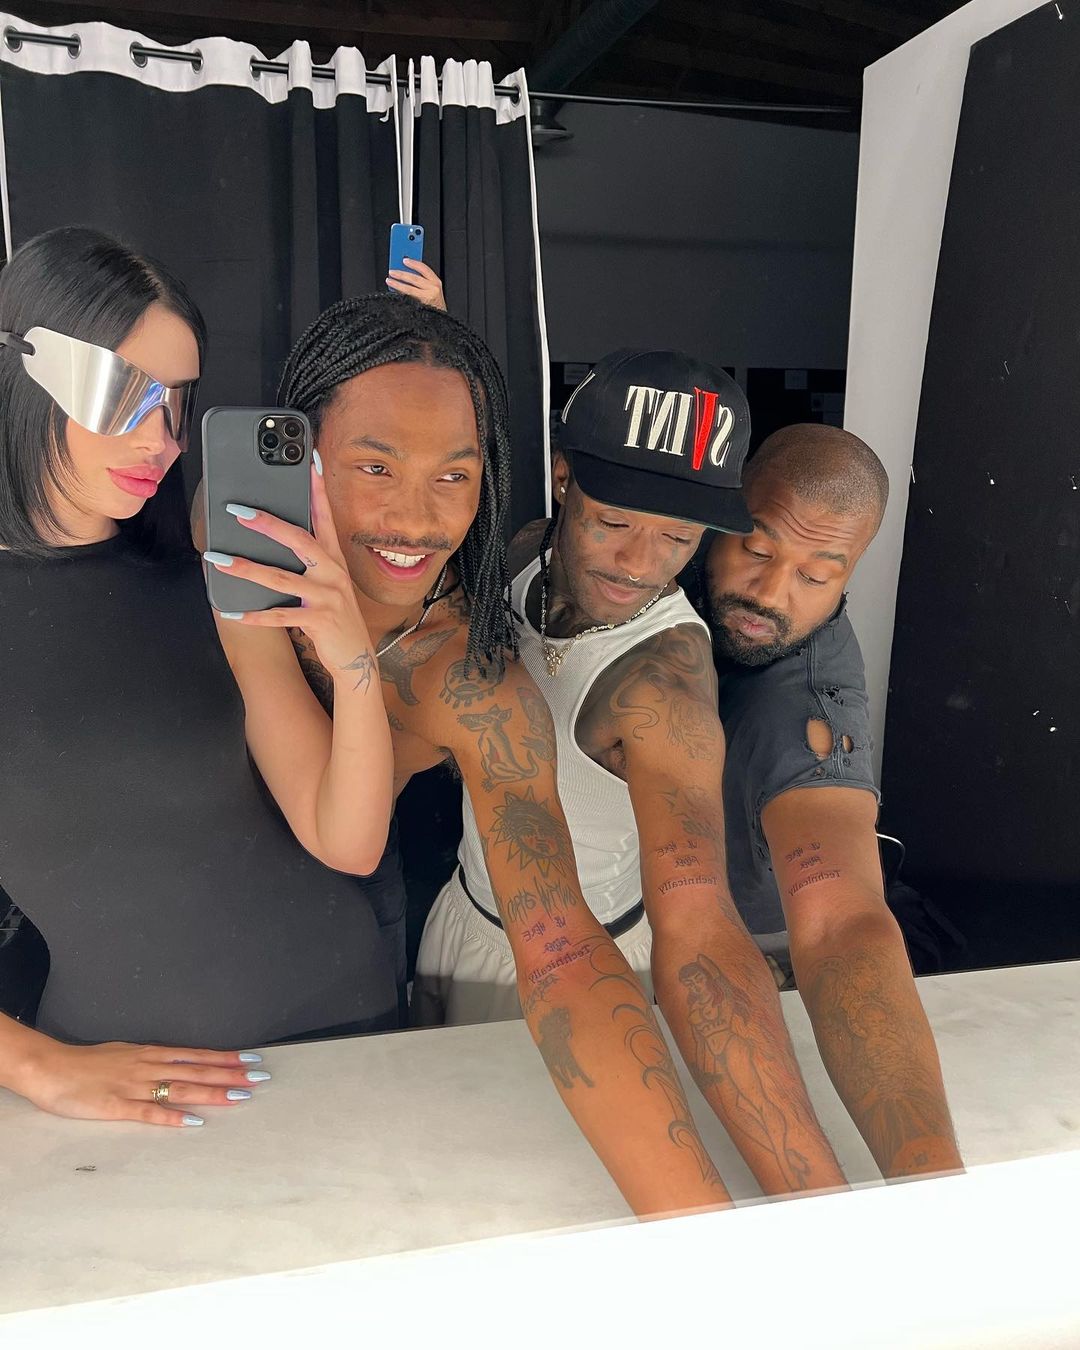 Kanye West Shows Off His New Tattoo With Fellow Geminis Lil Uzi Vert and Steve Lacy